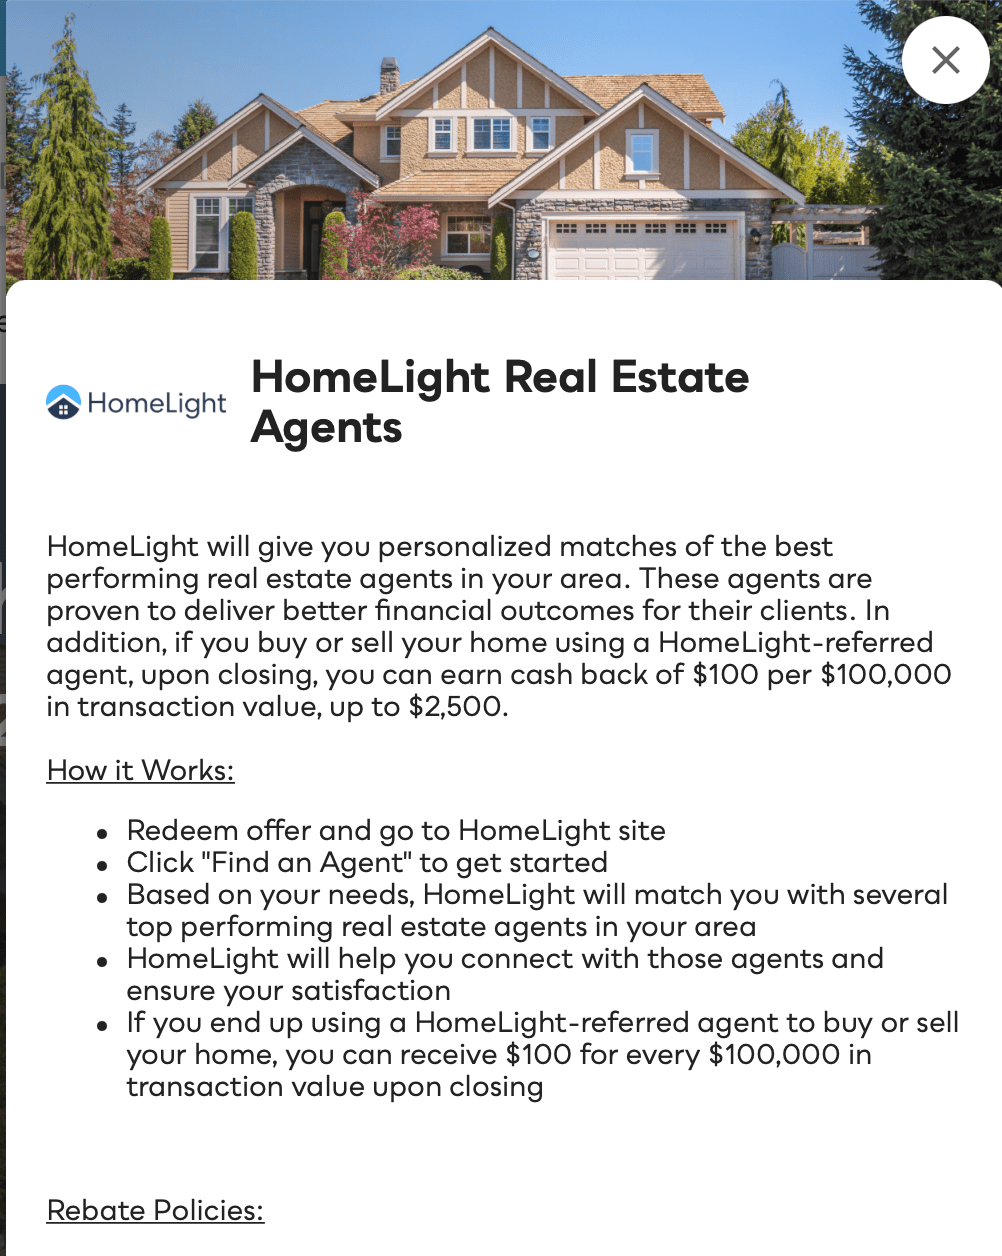 Home Light Real Estate Agents Savvy Perks